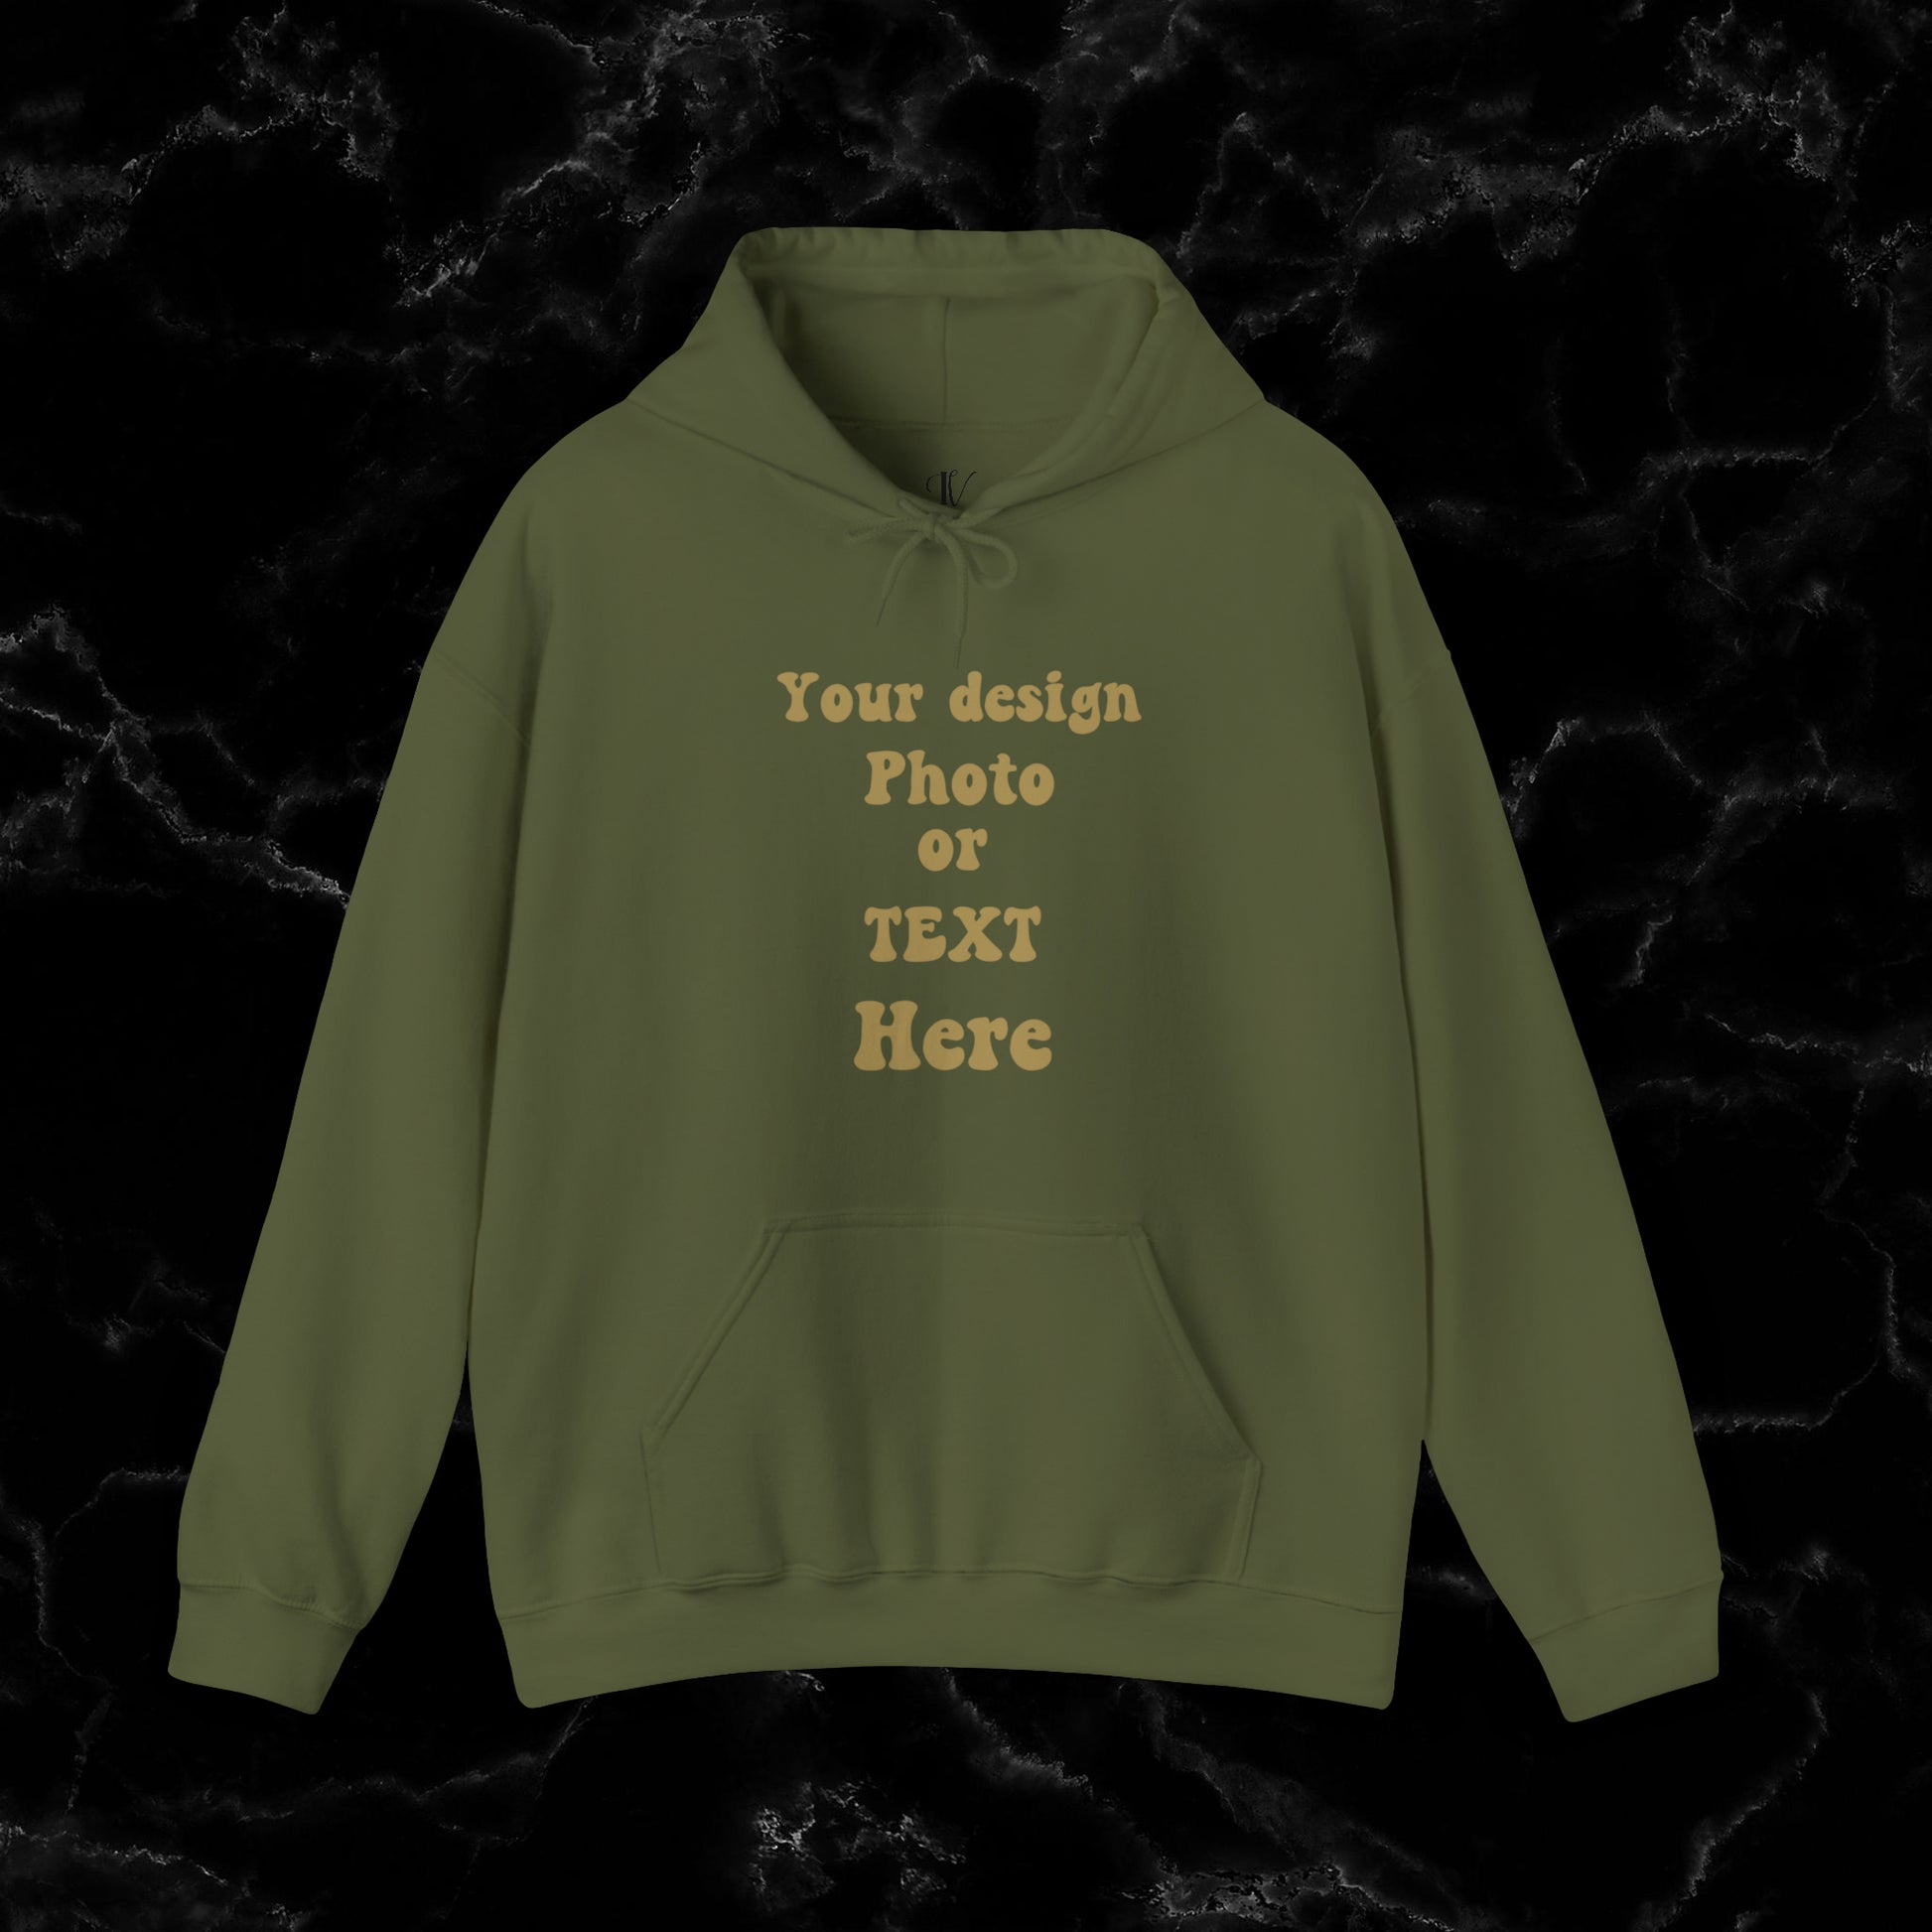 Cozy Personalization: Custom Hoodie - Your Cozy Canvas Personalized for Ultimate Comfort - Wrap Yourself in Unmatched Warmth with a Hoodie Tailored Just for You Hoodie Military Green S 